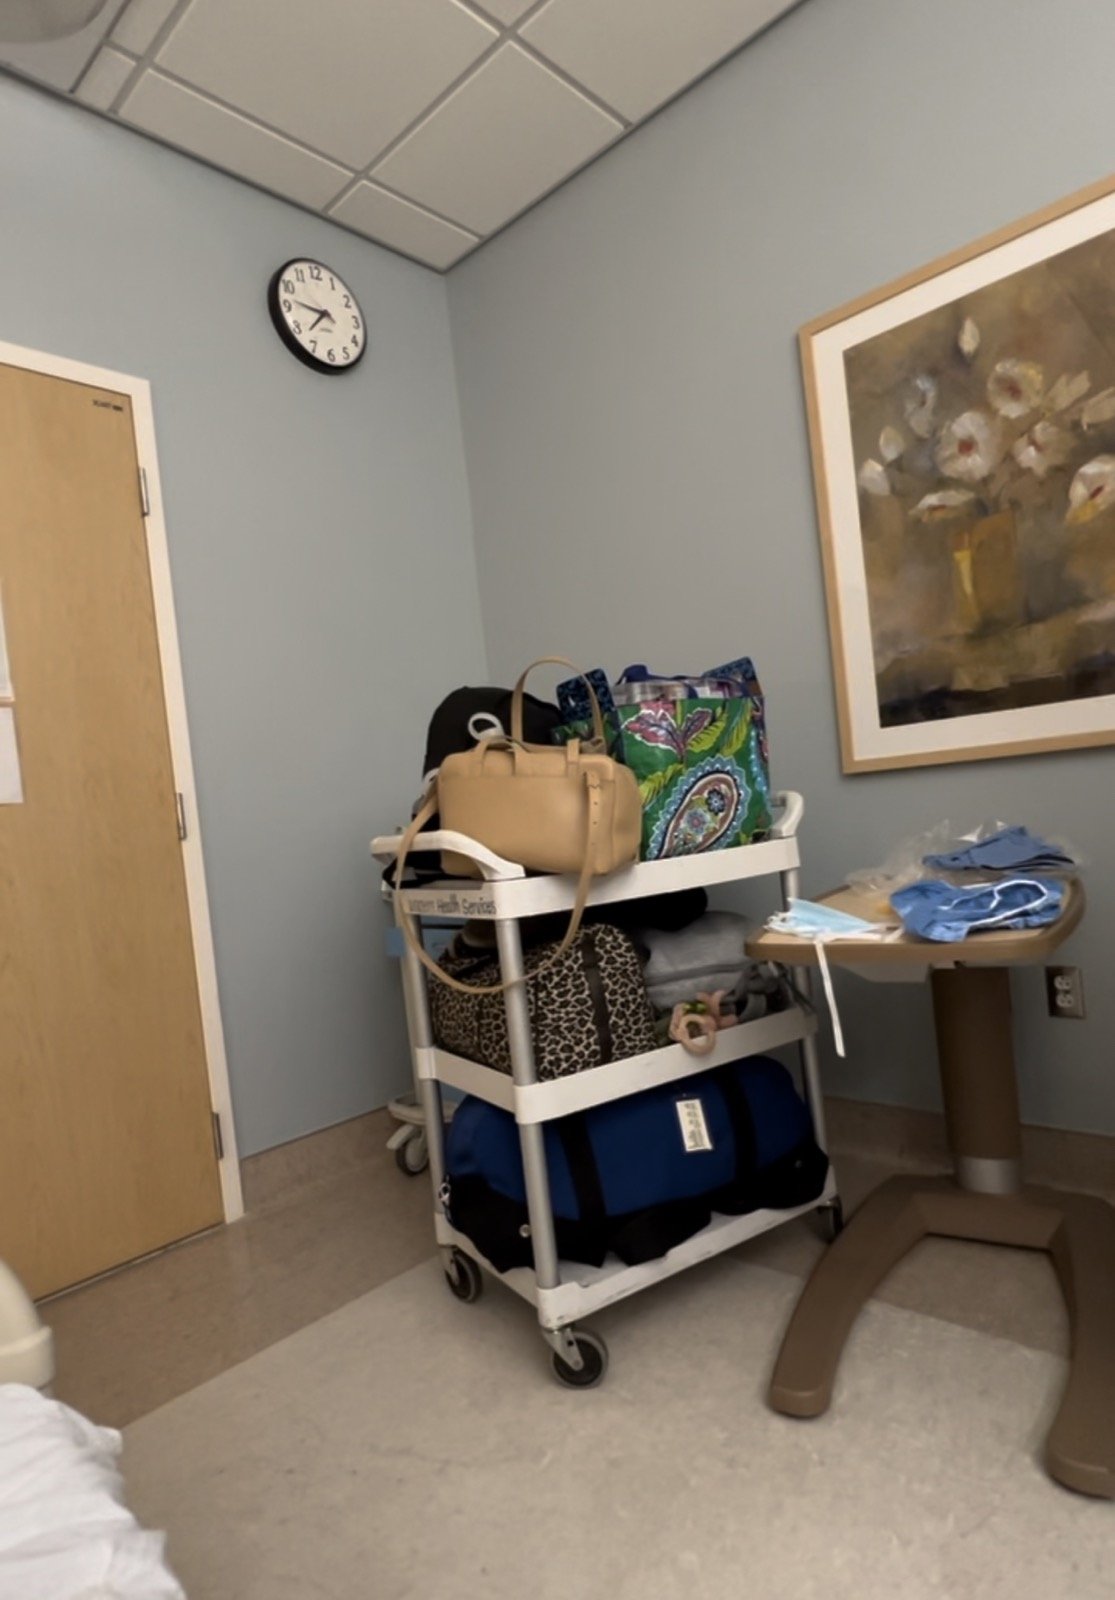 What I Packed in my Hospital Bag for my Twin Birth, c-section, cesarean section, what I didn't use in my hospital bag, what I wish I brought to the hospital, lments of style, favorite bags to bring to the hospital